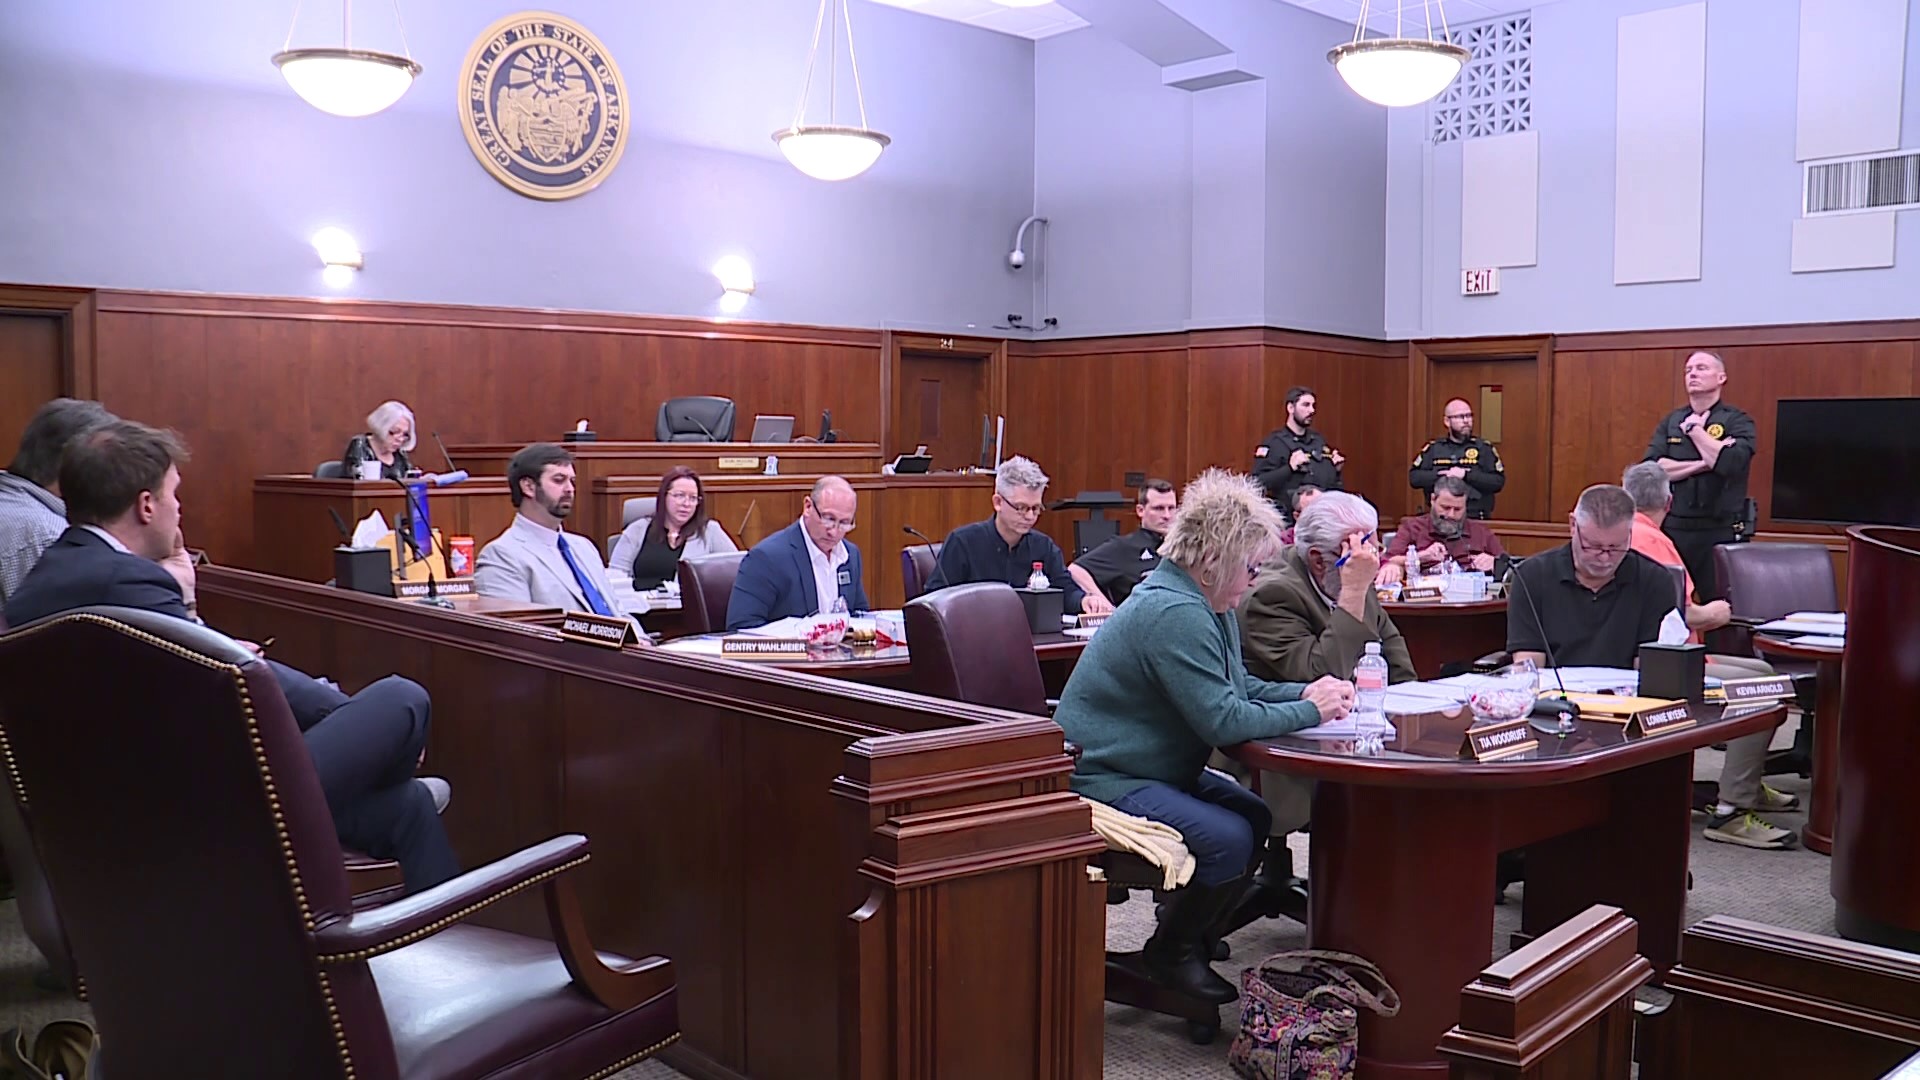 A Crawford County quorum court meeting hosted a heated discussion around banning the library's books on "alternative lifestyles," or LGBTQ+ topics.